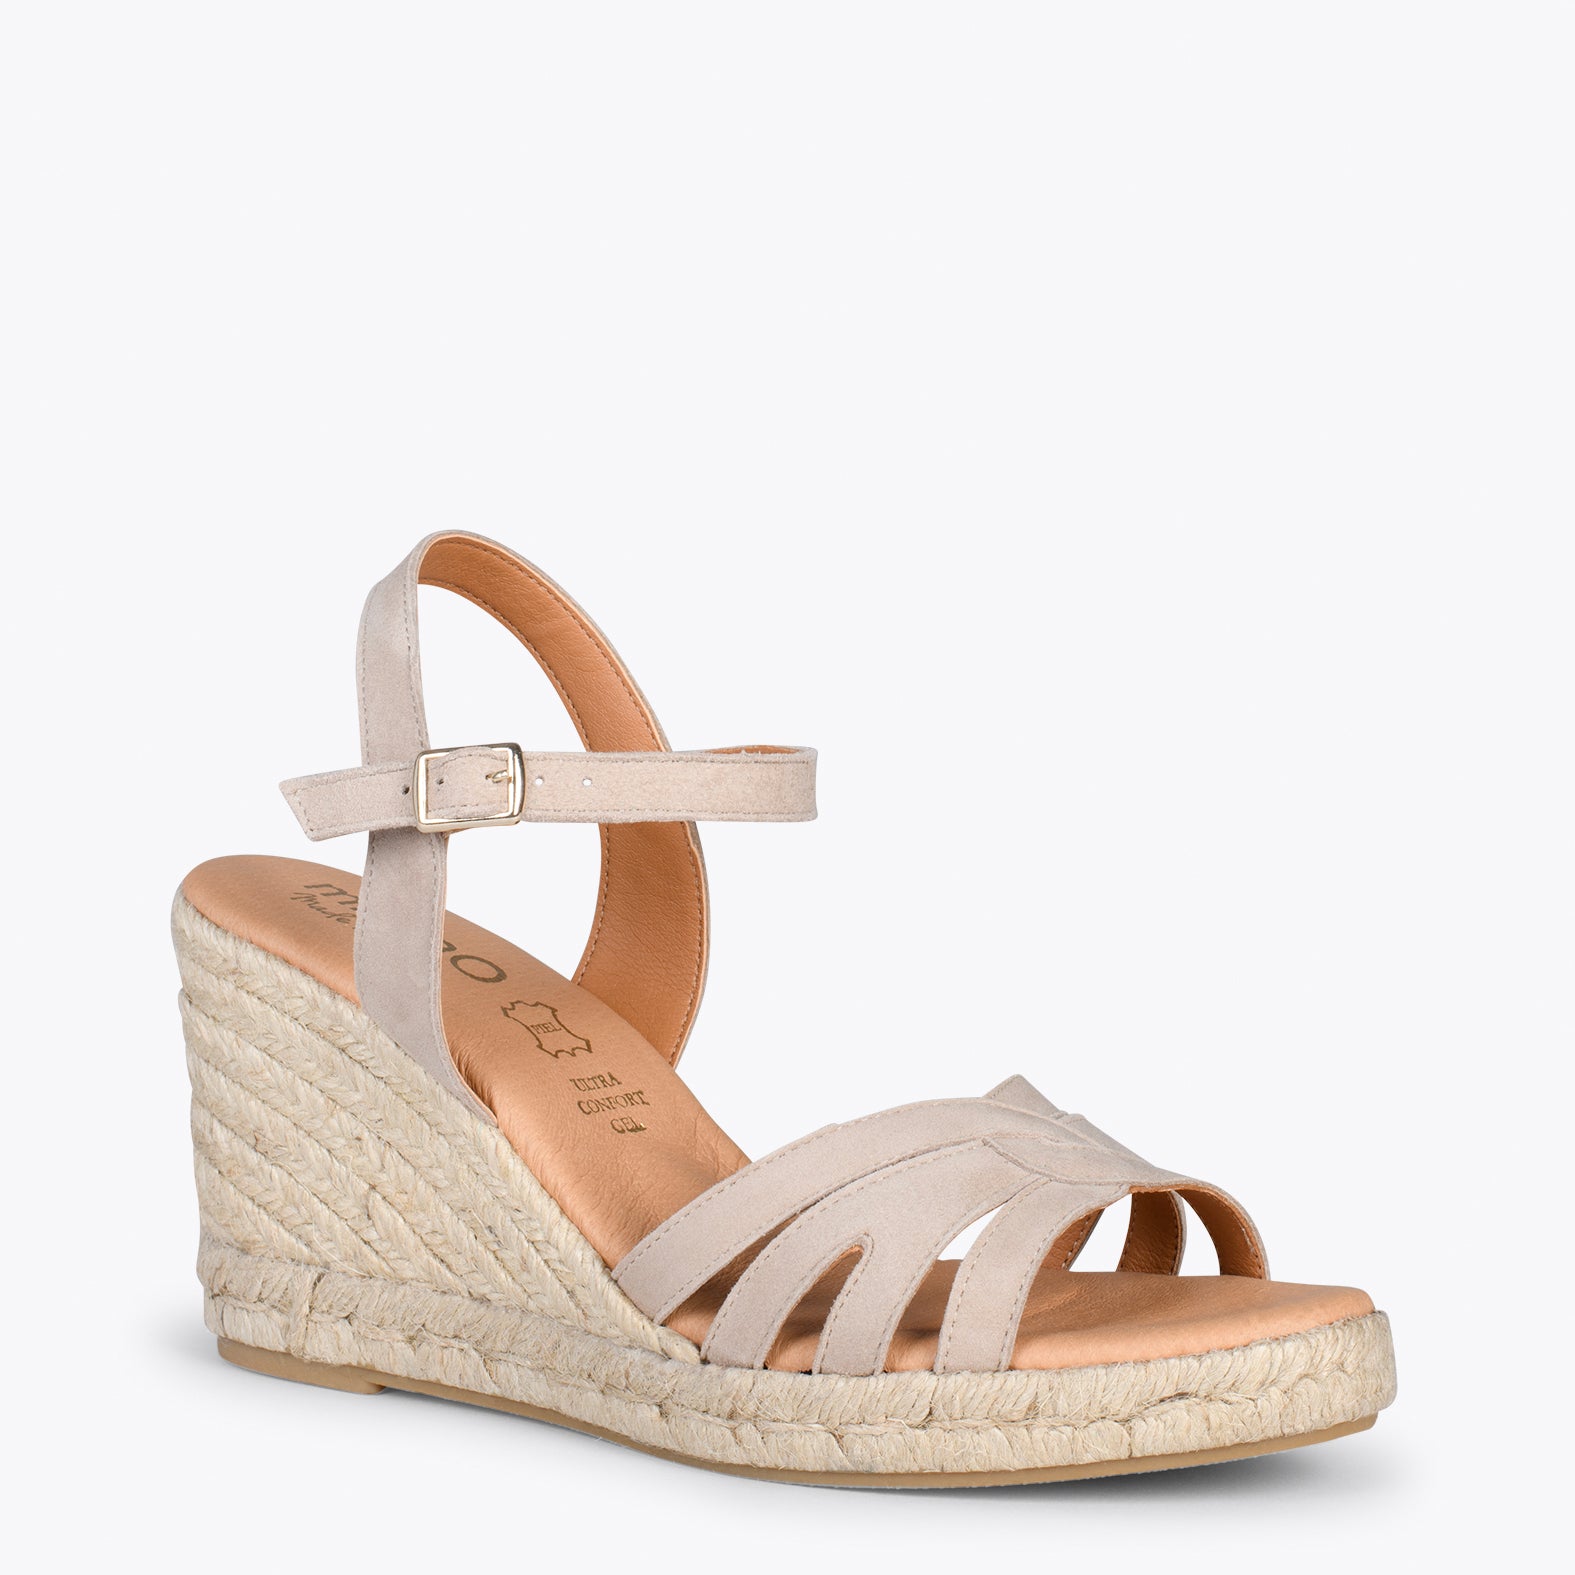 HOYAMBRE – TAUPE espadrilles with braided front